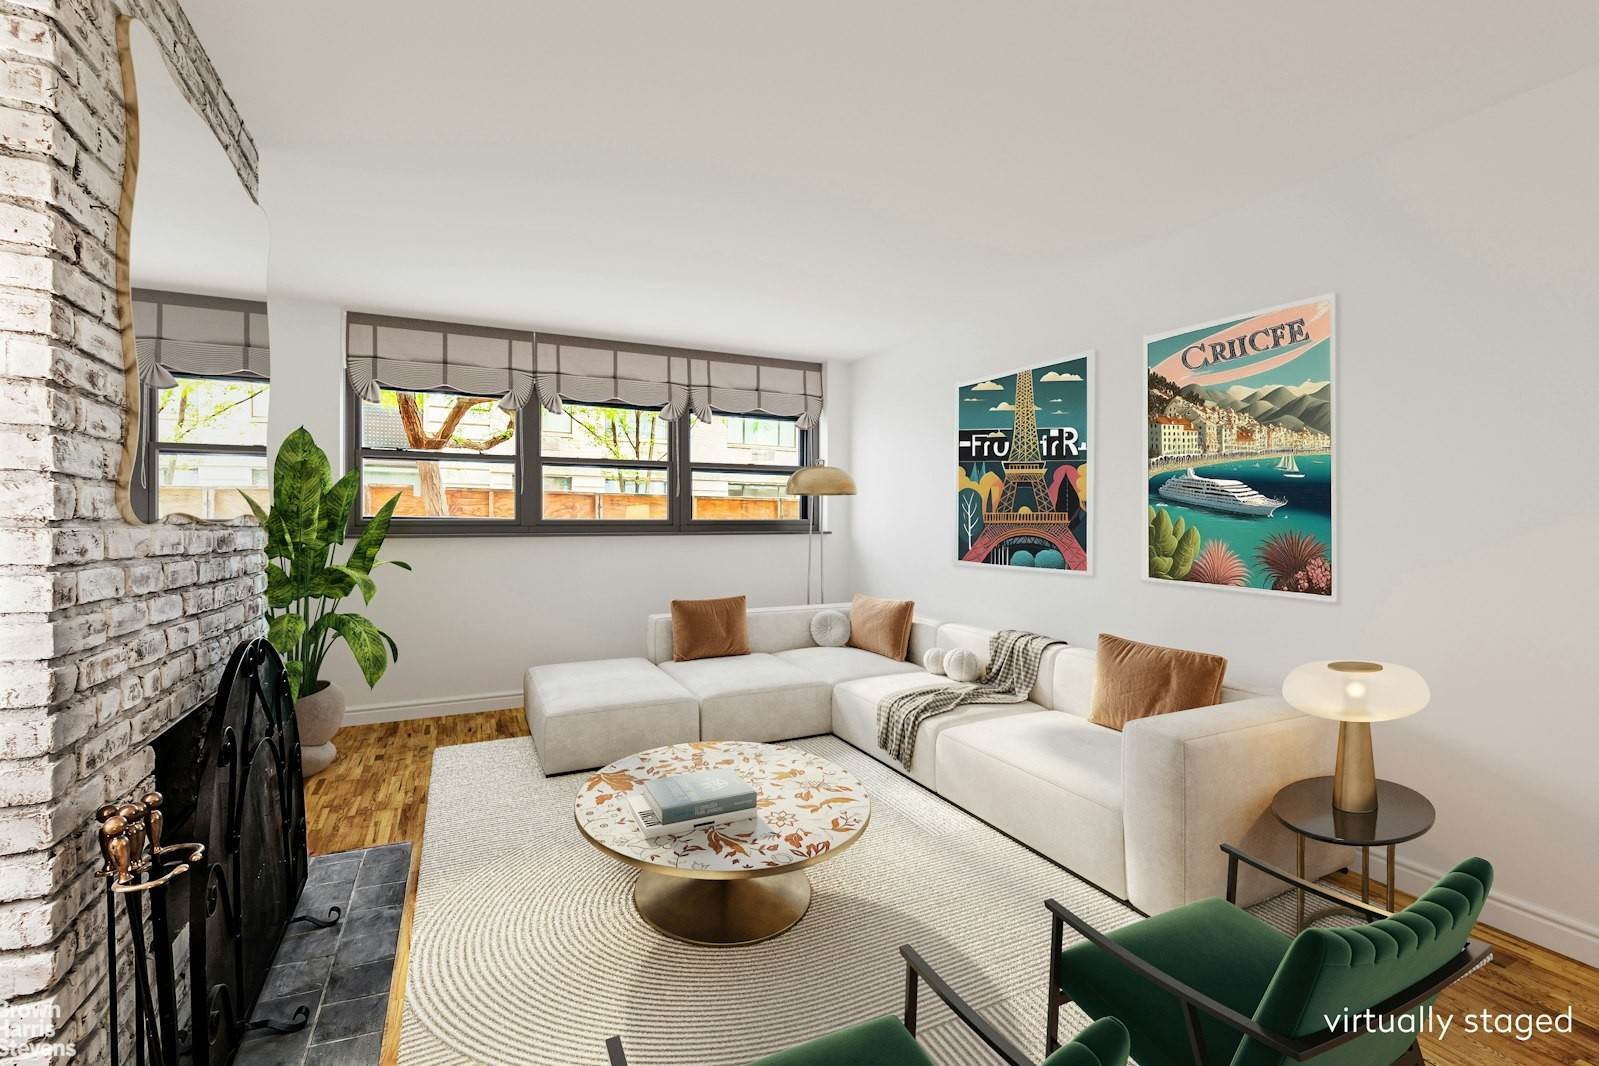 Cooperative for Sale at Greenwich Village, Manhattan, NY 10003